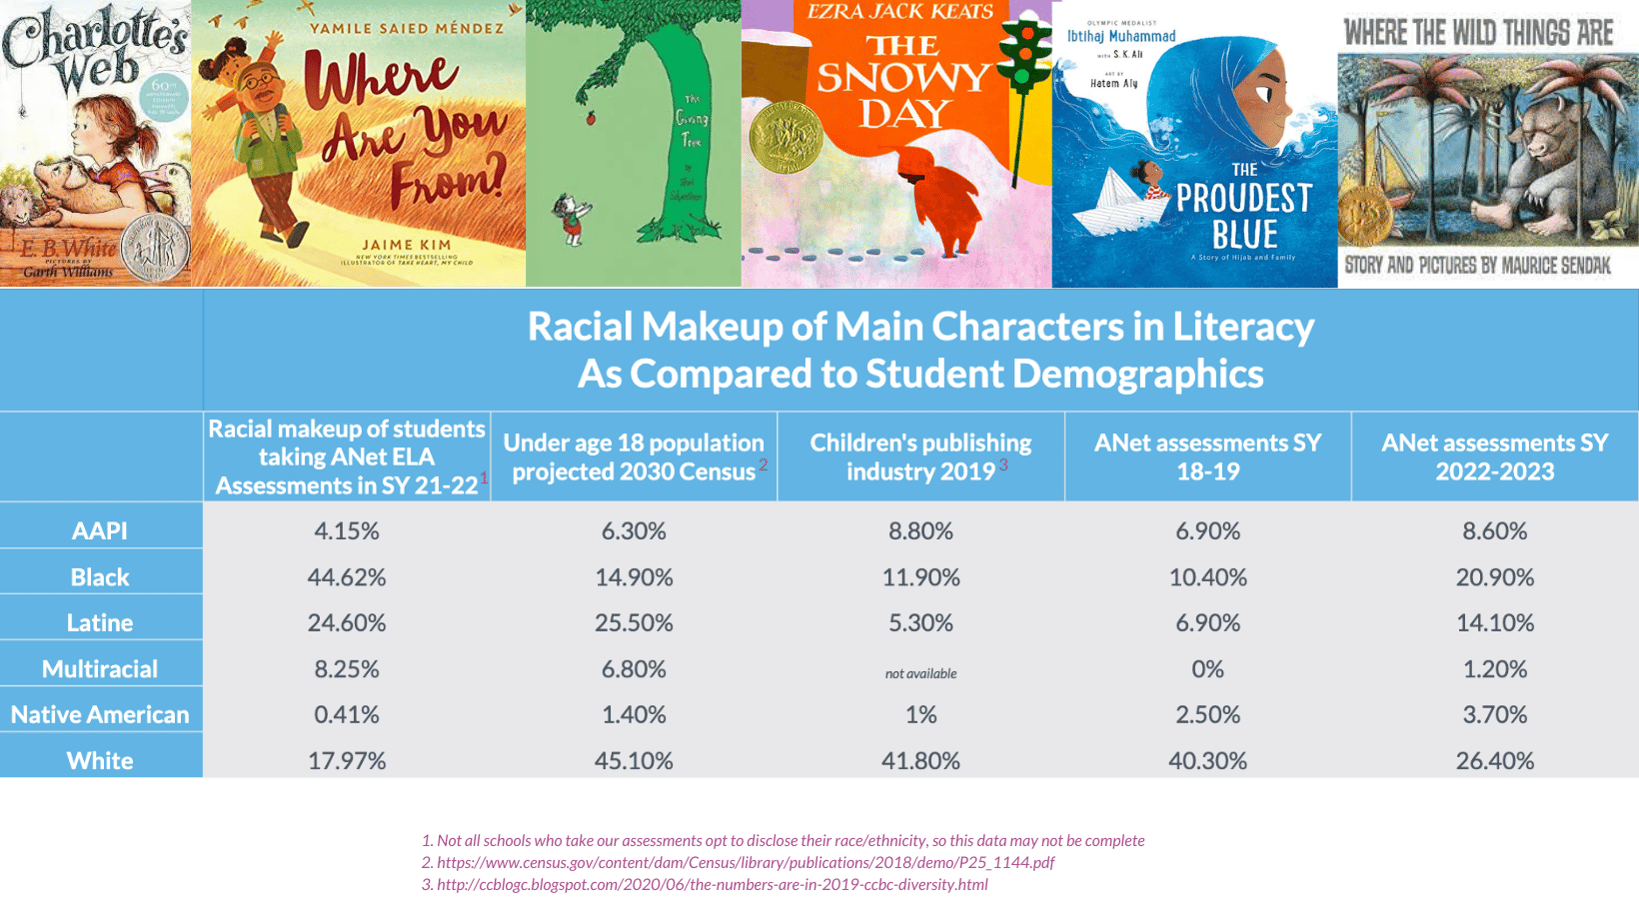 Racial makeup of main characters in literacy as compared to student demographics in ANet partner schools and more broadly